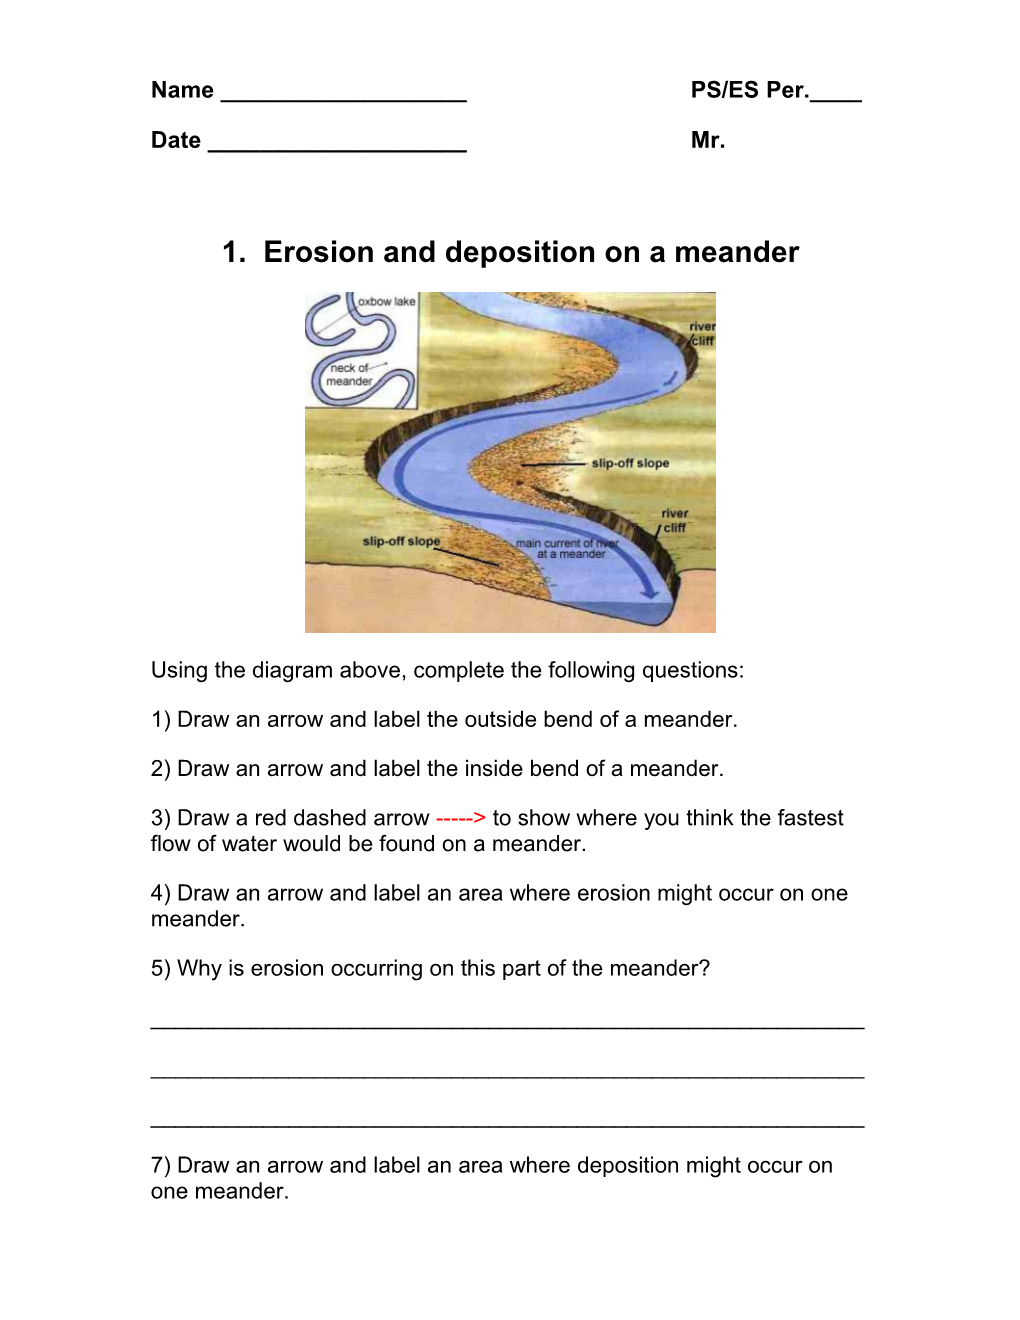 25: Erosion and Deposition on a Meander